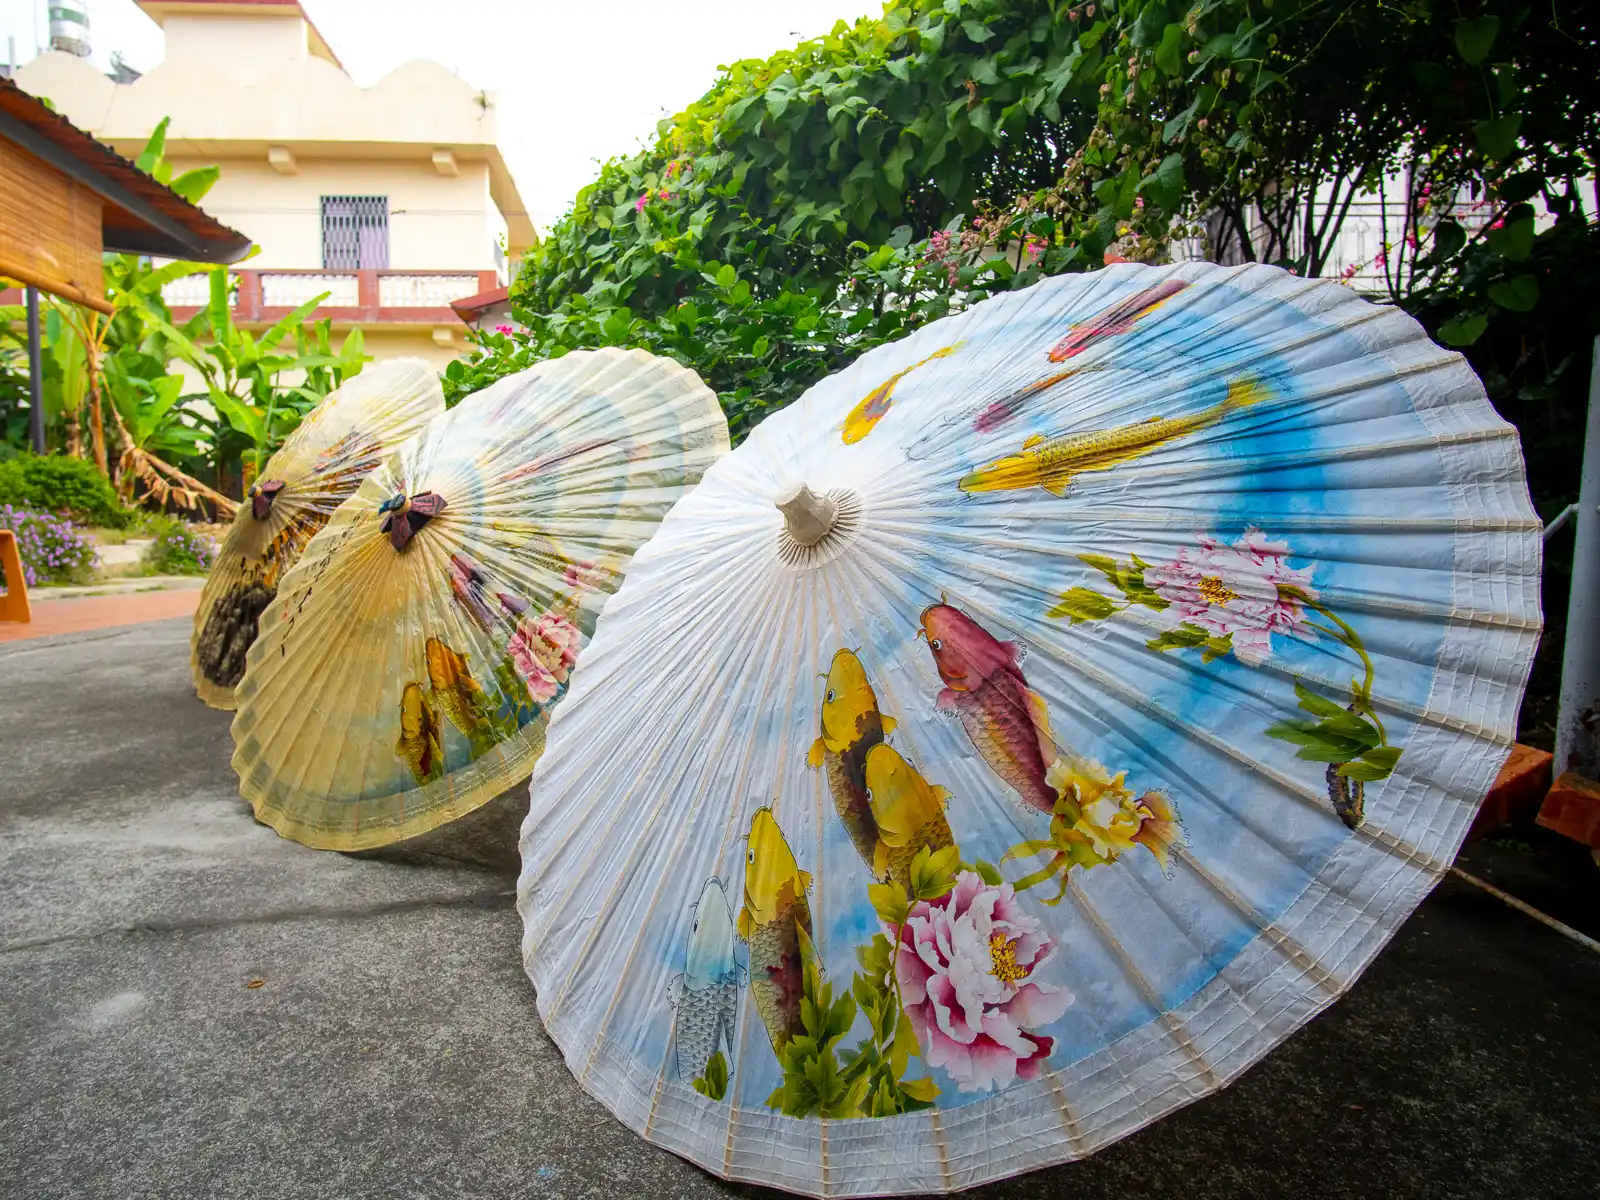 Three oil-paper umbrellas on display are decorated with images of fish and flowers.